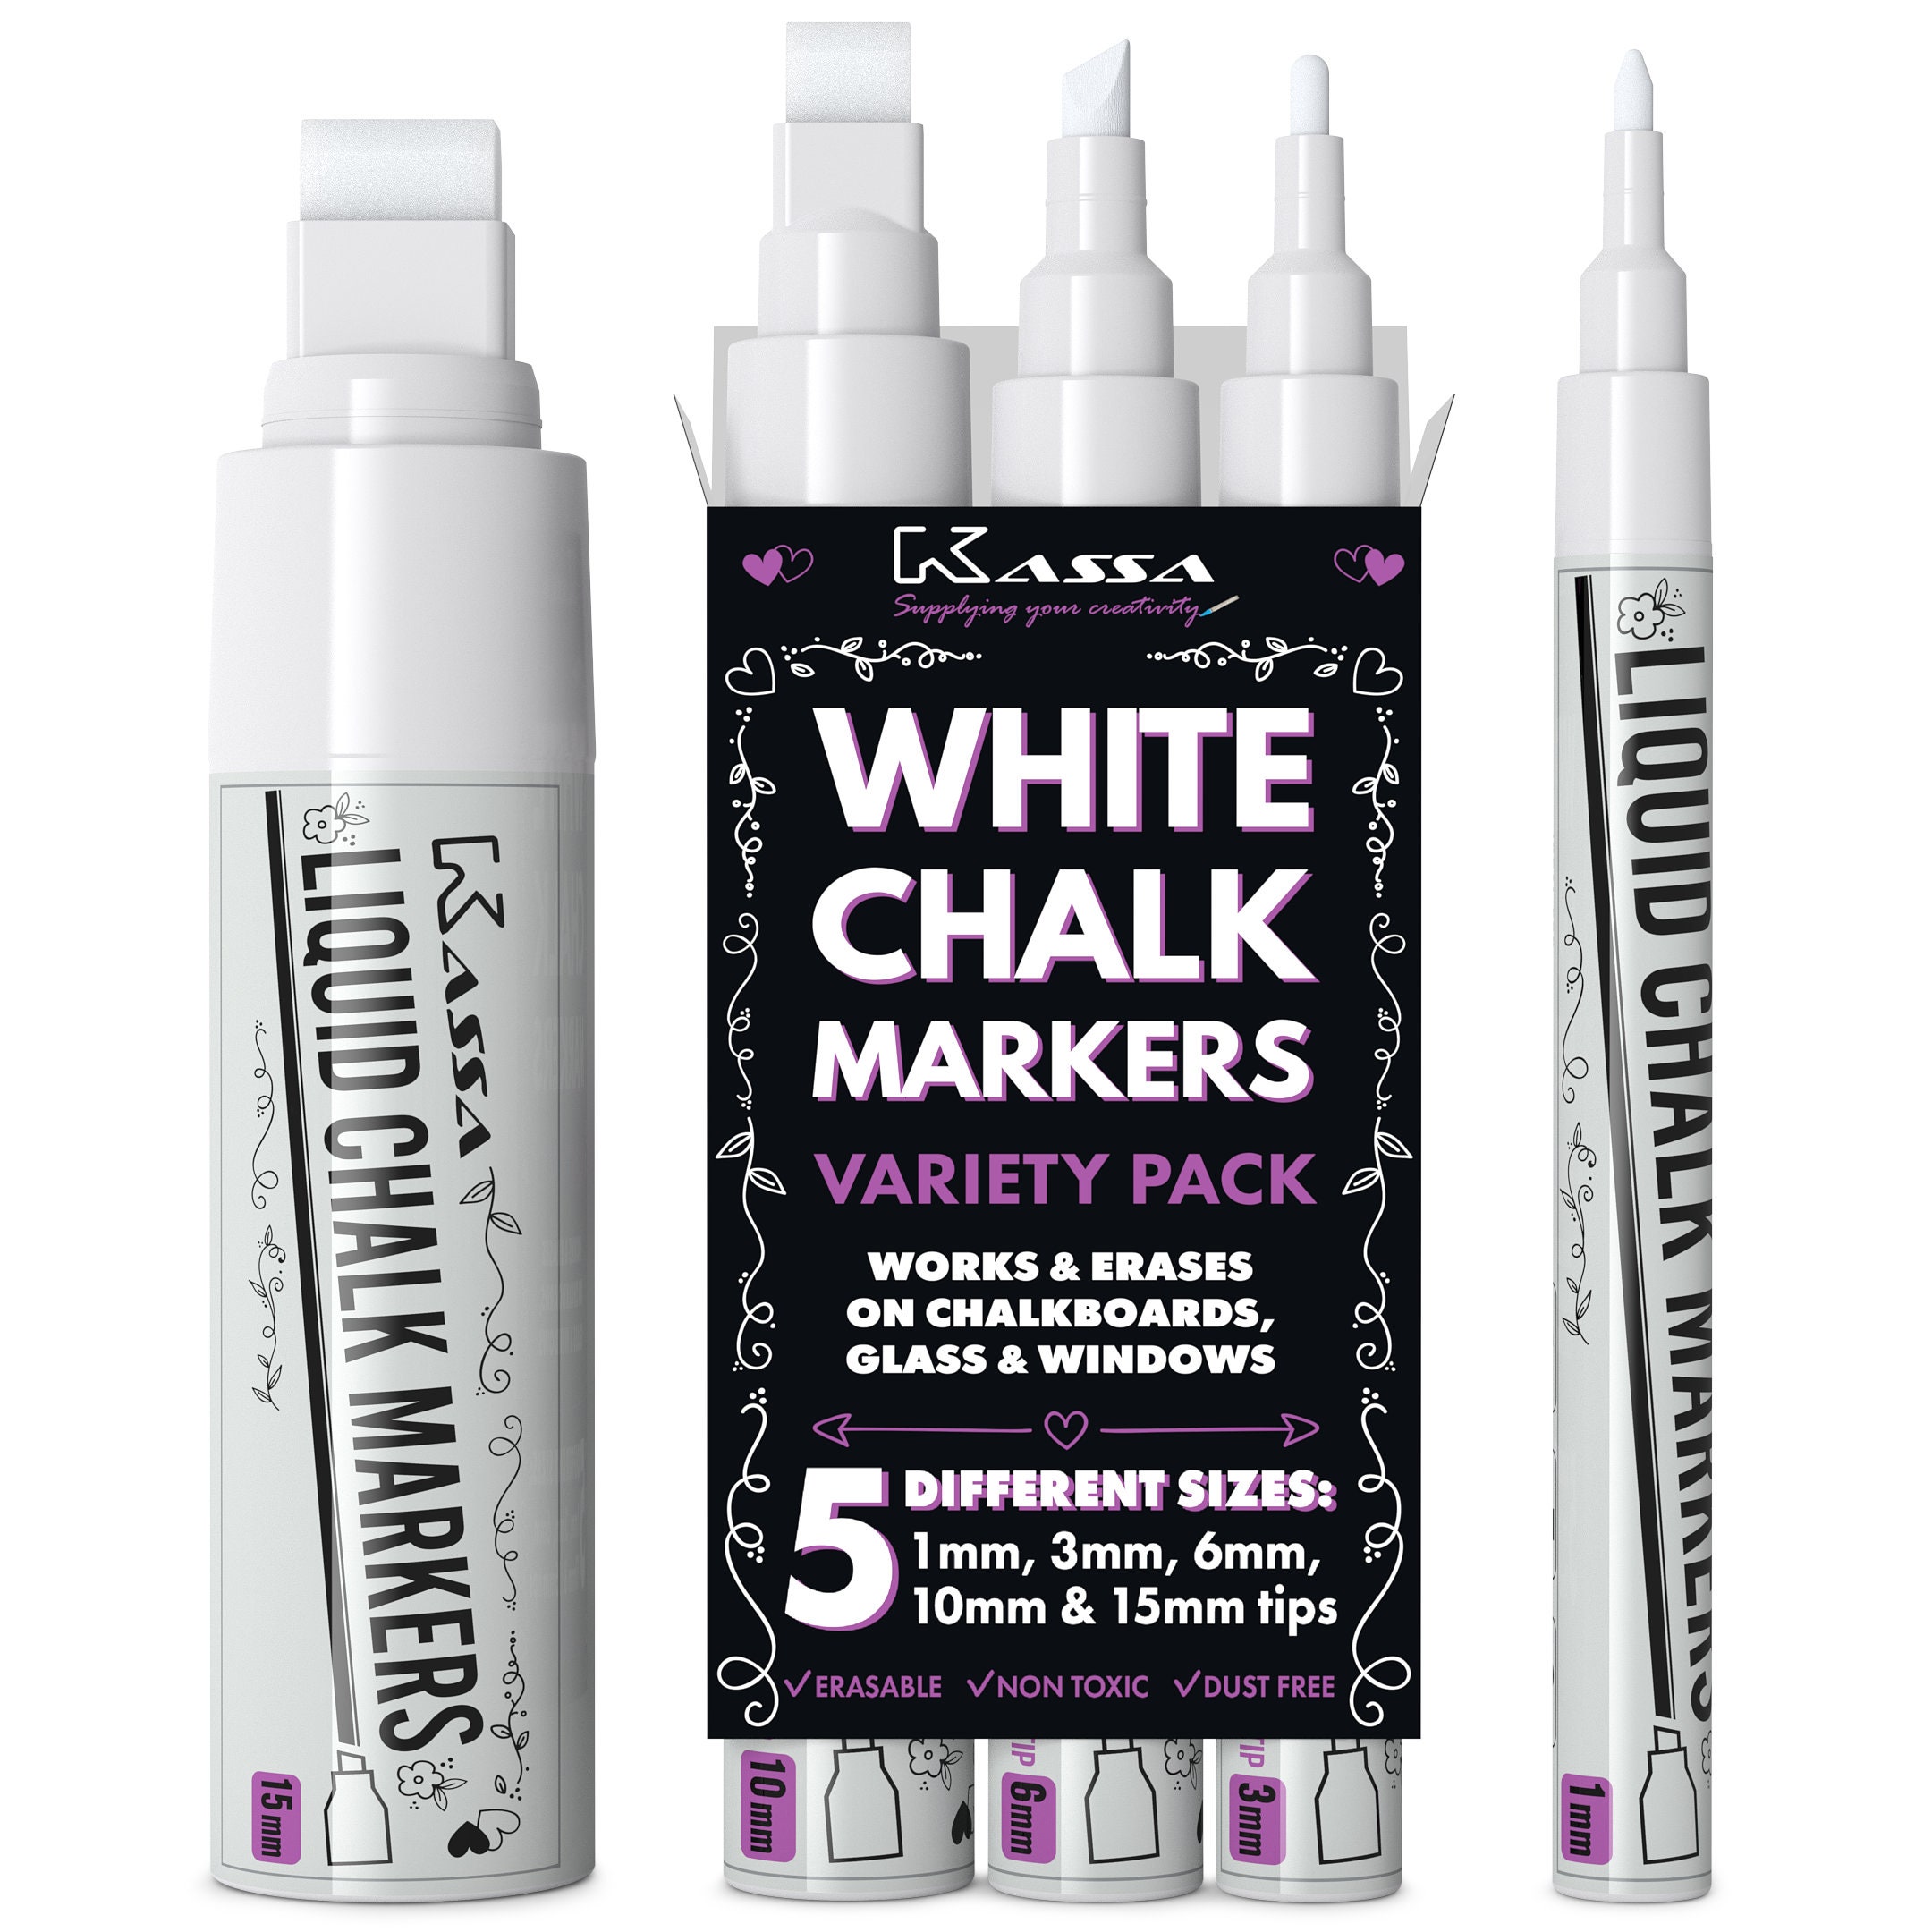 Dust Free and Easy Wipe Away Liquid Chalk Markers - 18 Pieces 